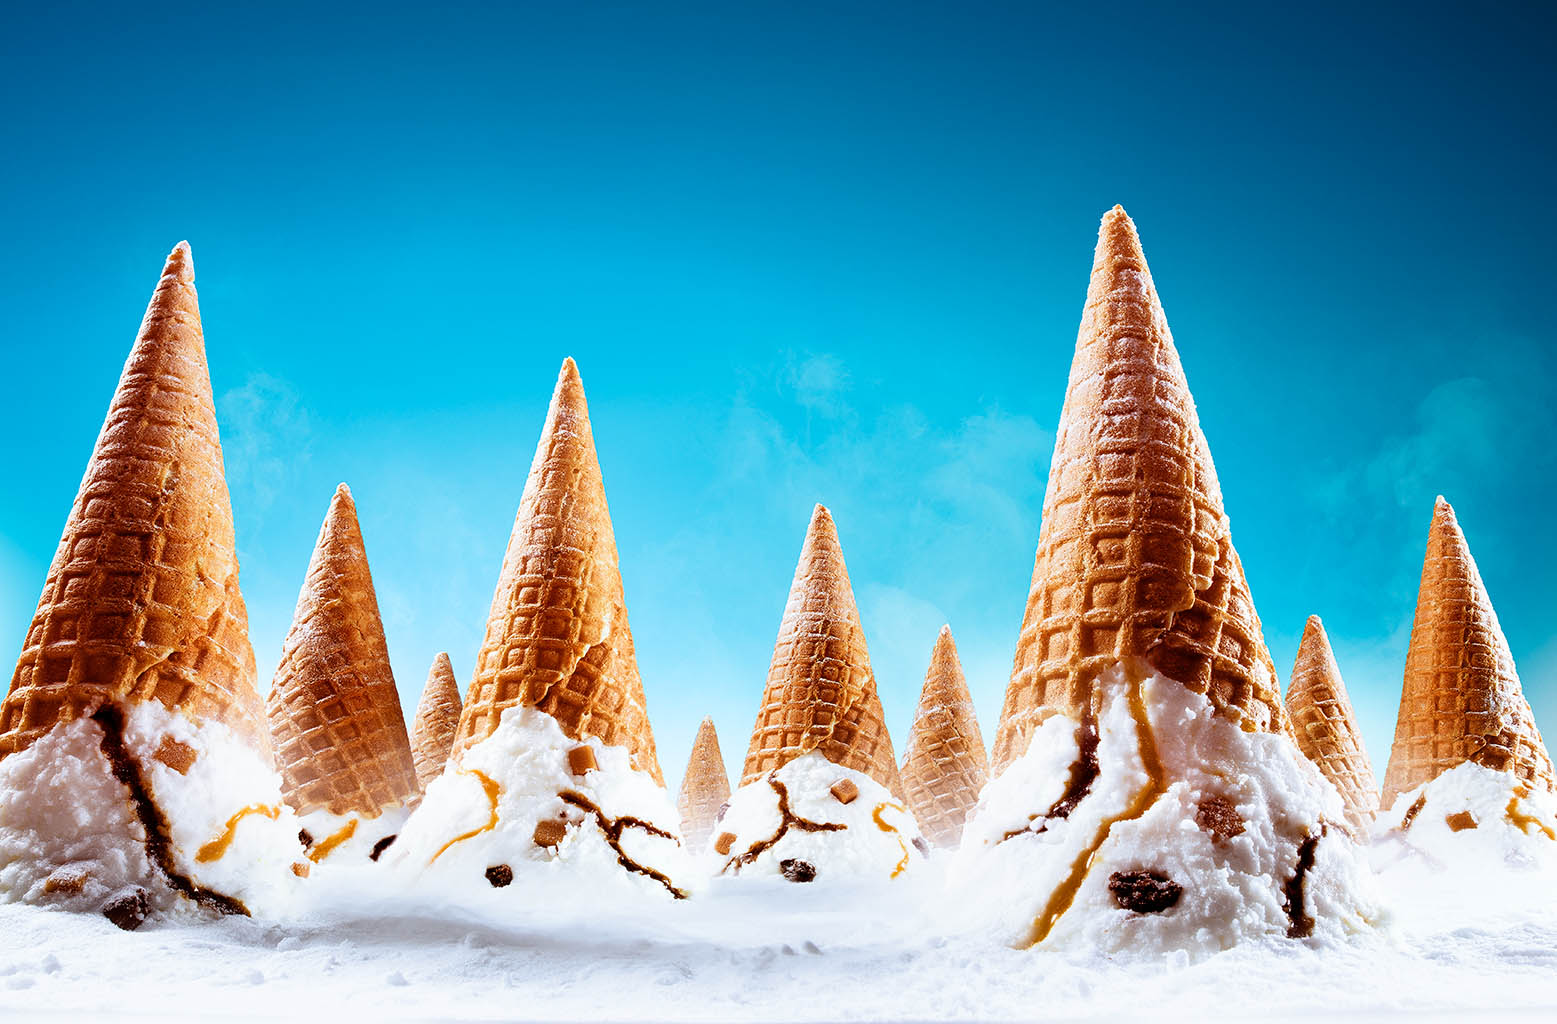 Advertising Still Life Product Photography of Cornetto ice cream by Packshot Factory